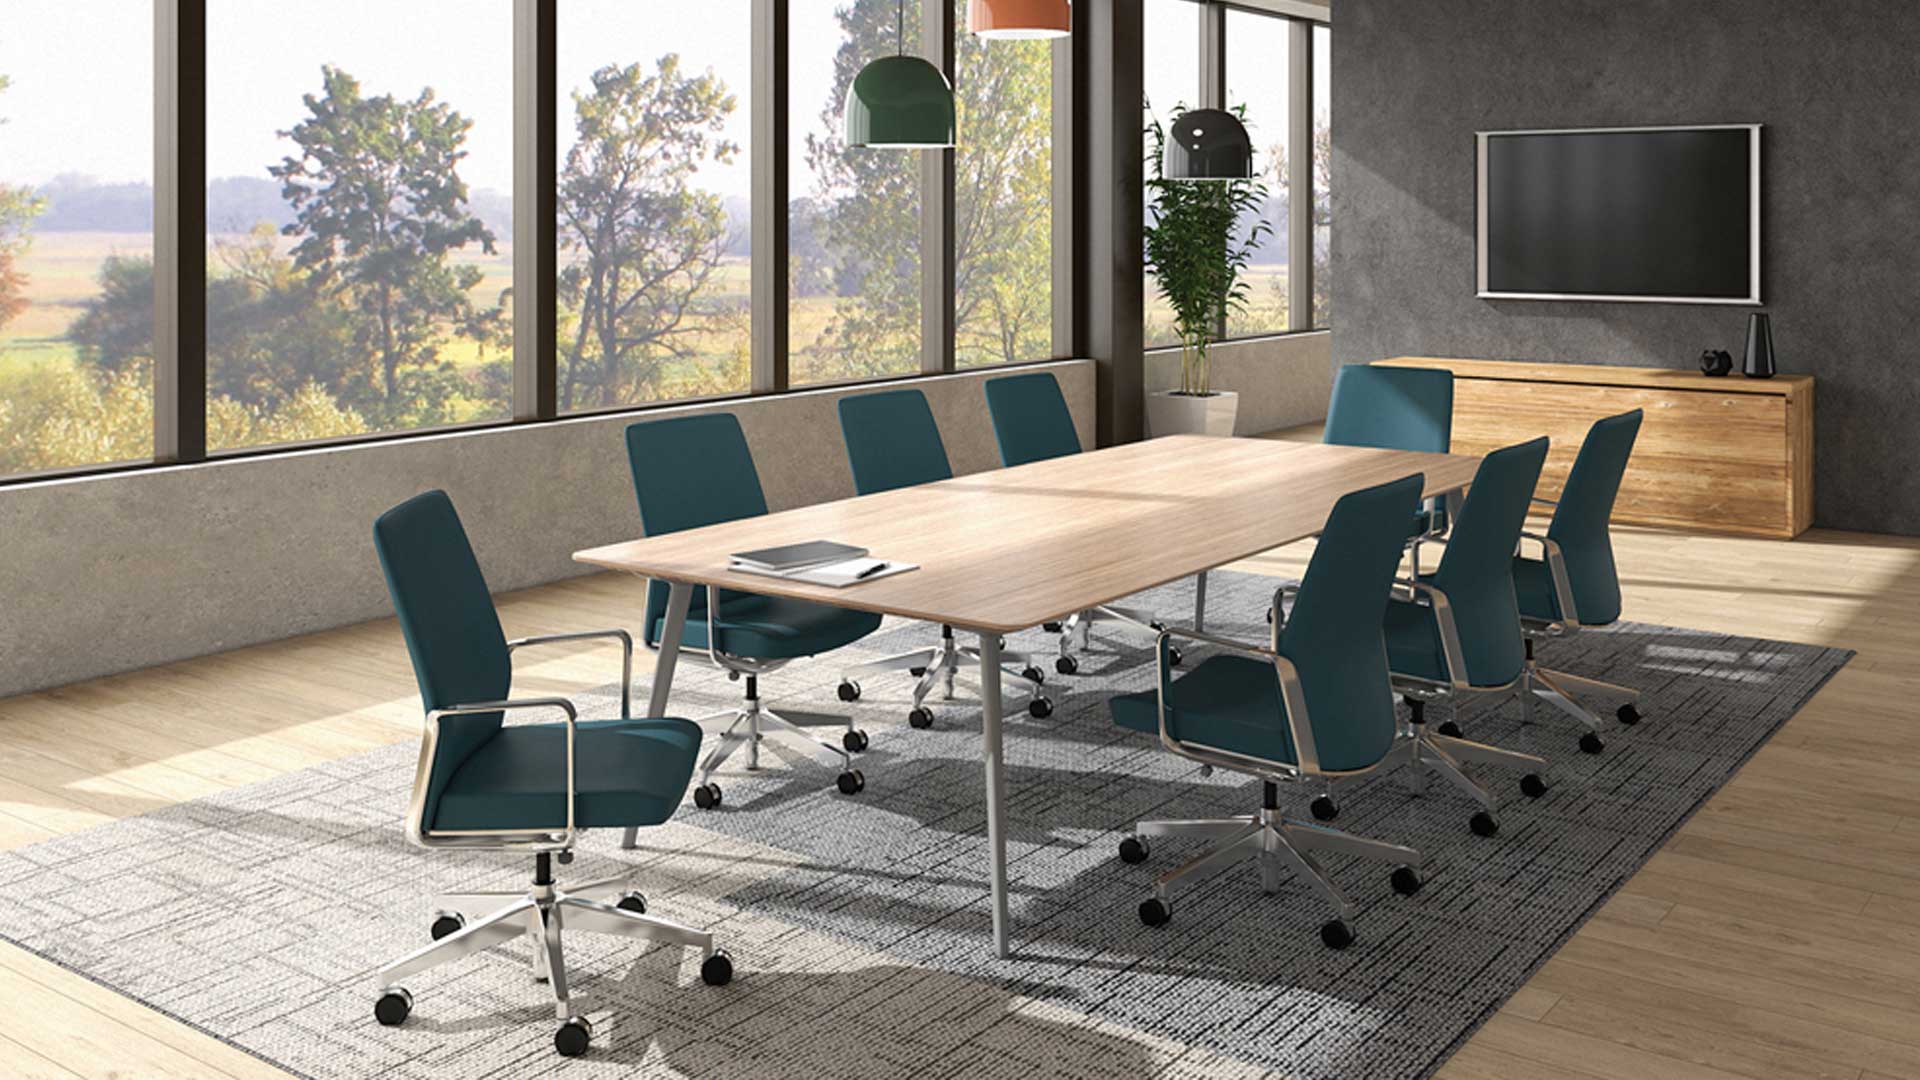 supply of office furniture